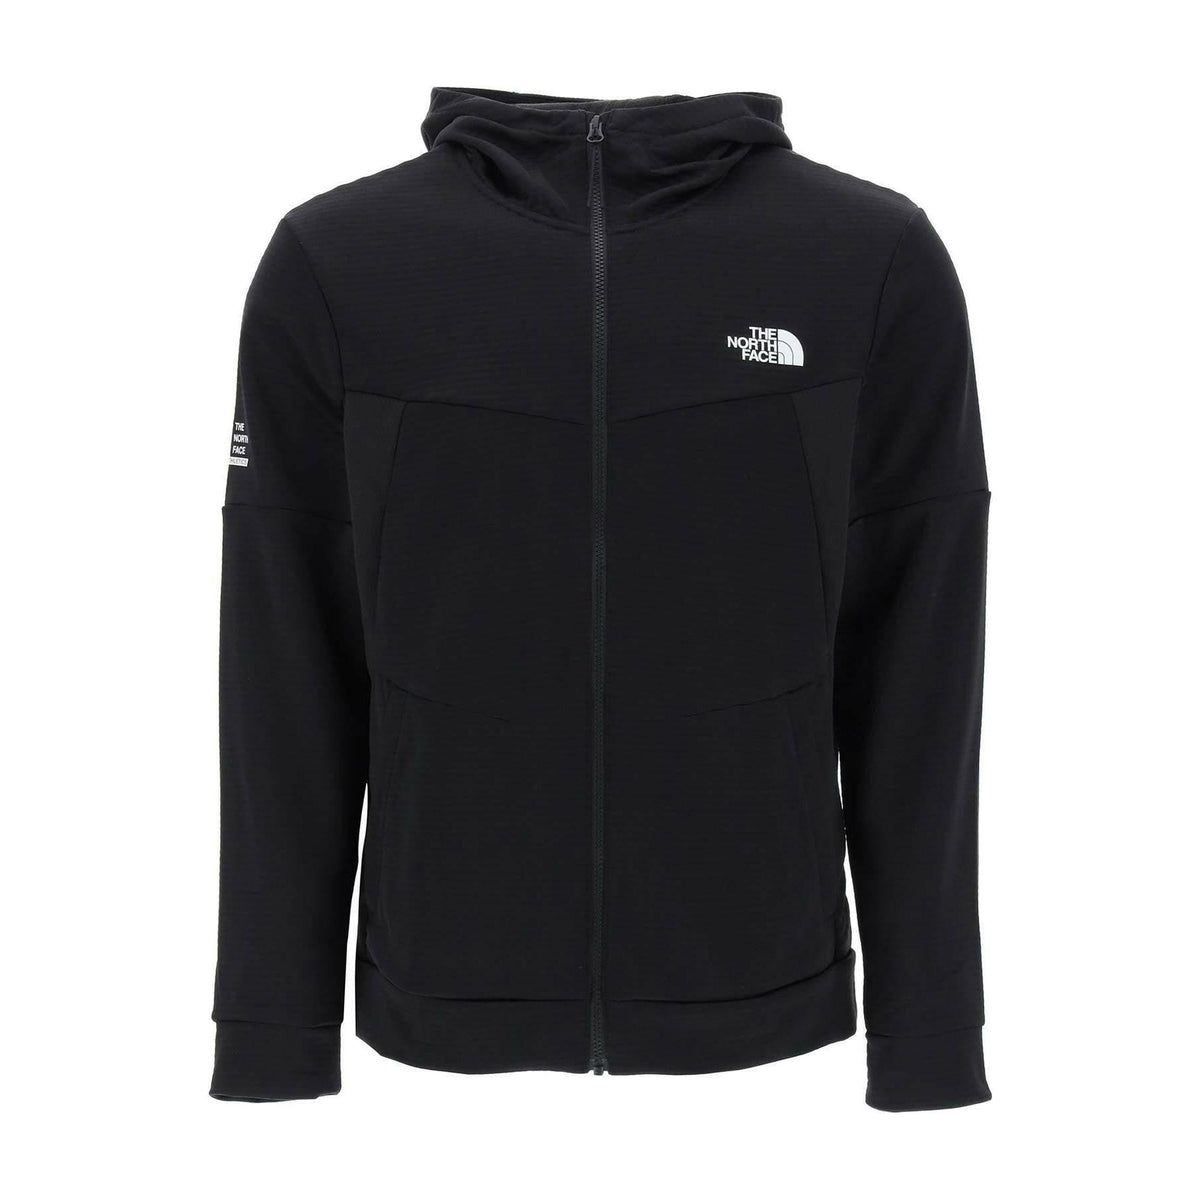 THE NORTH FACE - The North Face Black Logo Embroidered Zip-Up Hoodie - JOHN JULIA